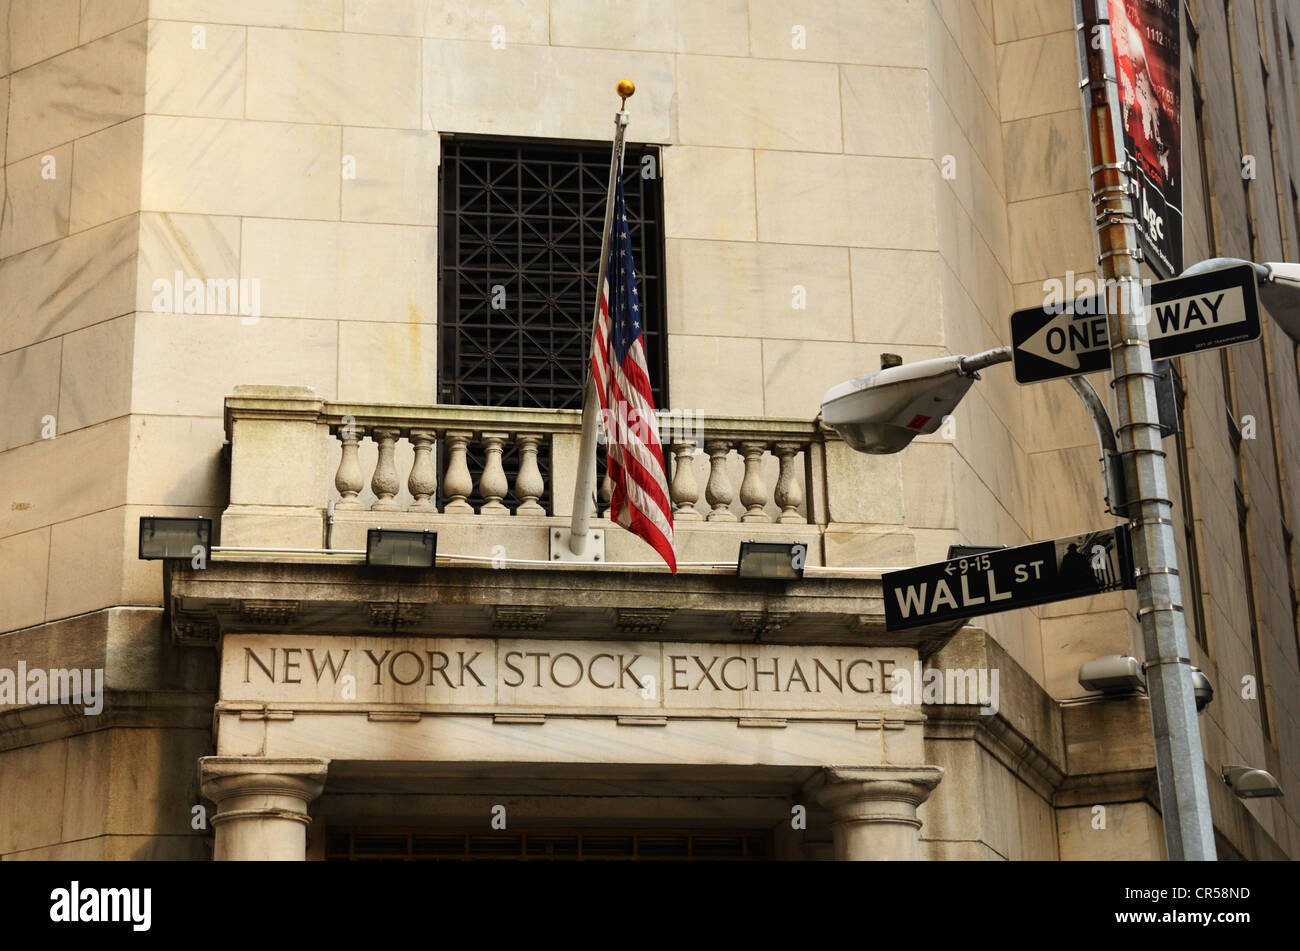 The New York Stock Exchange on Wall Street in New York, New York, USA. Stock Photo